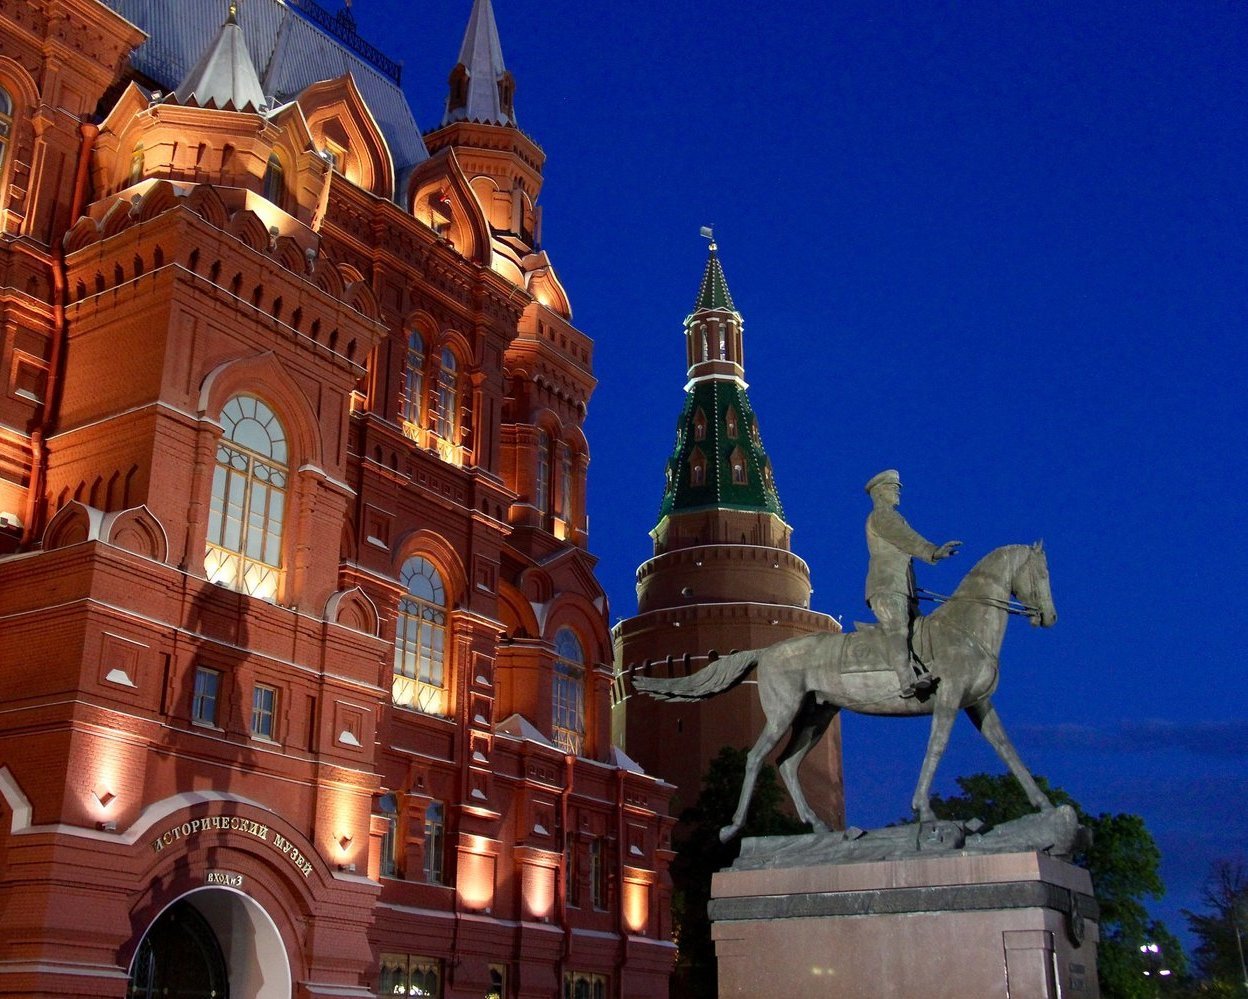 Zhukov Monument, Red Square, Moscow